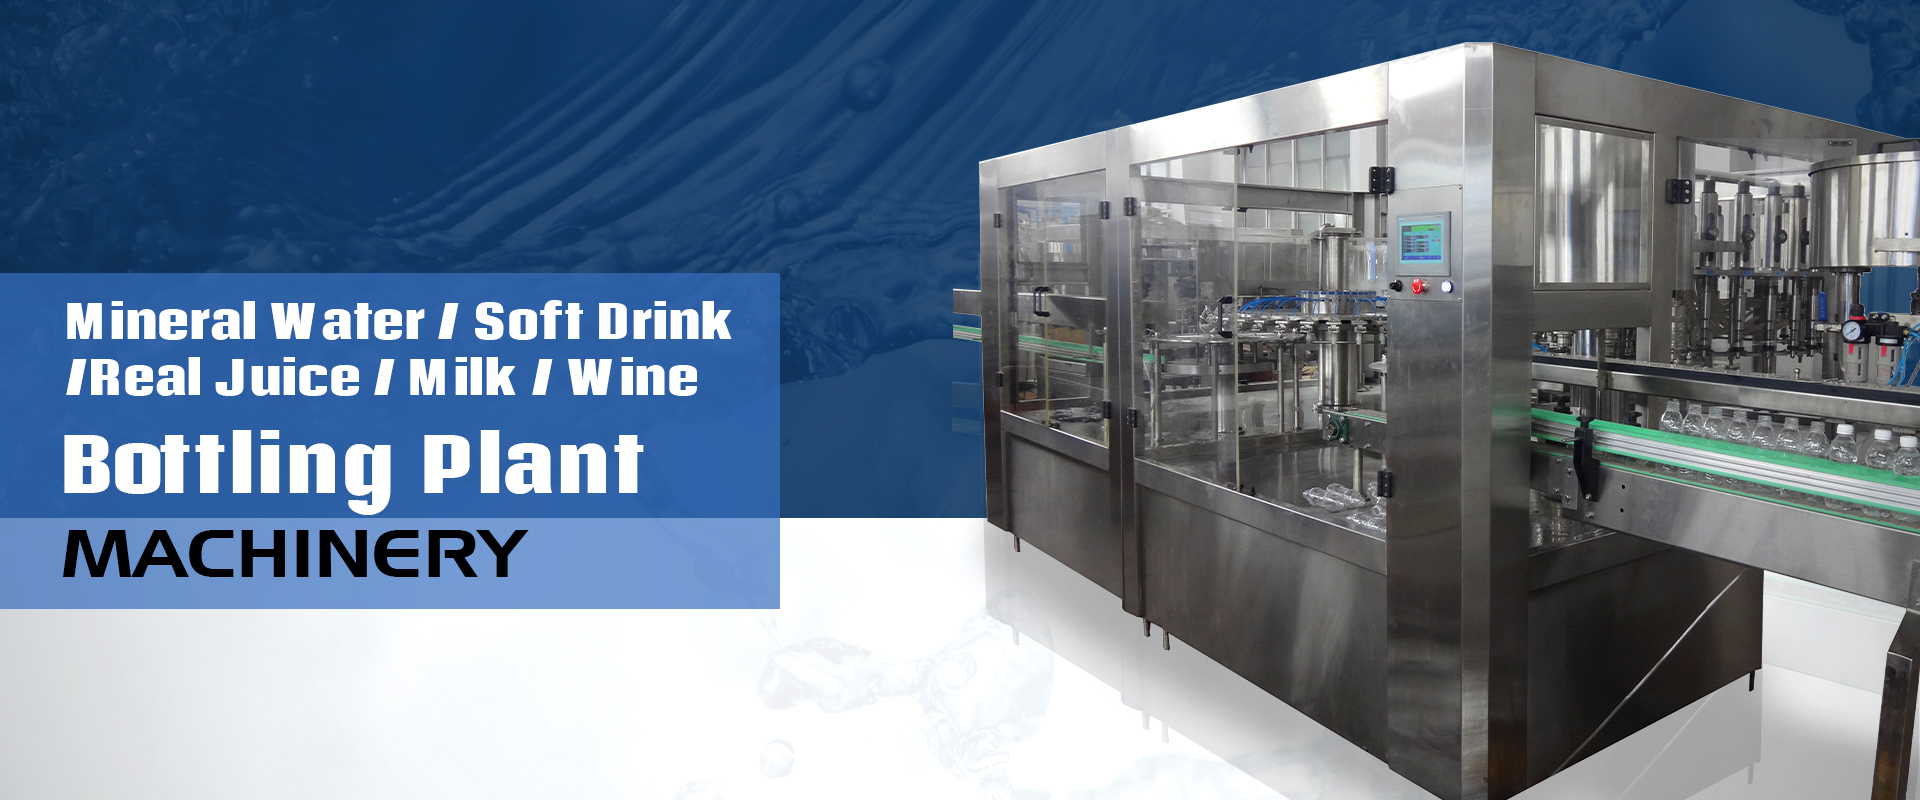 Mineral Water / Soft Drink / Real Juice / Milk / Wine Bottling Plant And Machinery In Ras El Matn